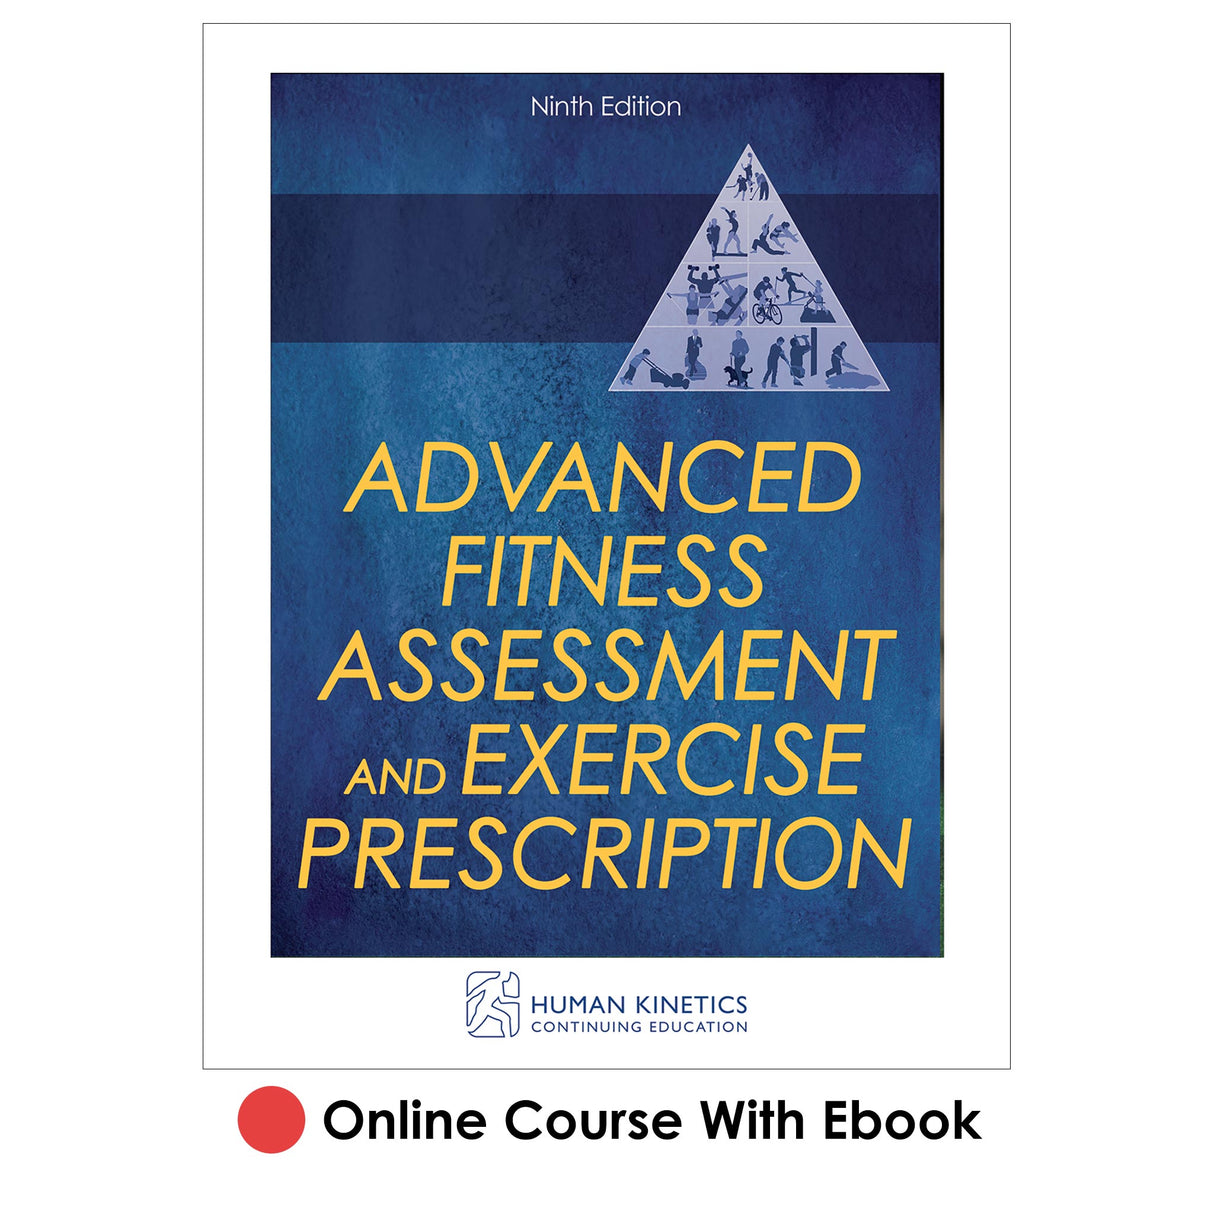 Advanced Fitness Assessment and Exercise Prescription 9th Edition Online CE Course With Ebook